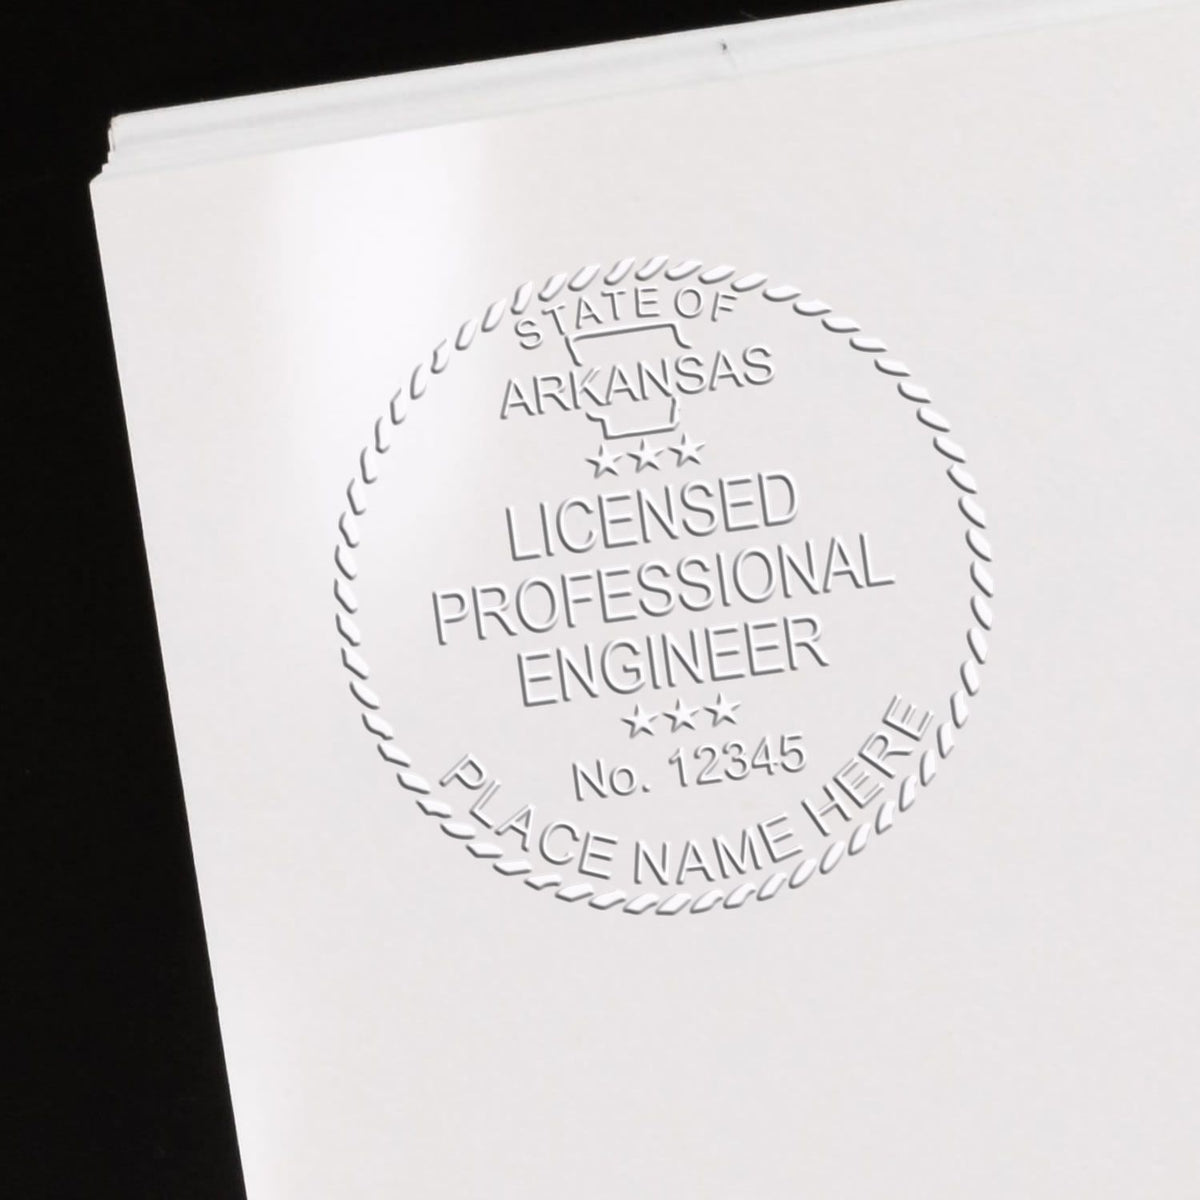 An alternative view of the State of Arkansas Extended Long Reach Engineer Seal stamped on a sheet of paper showing the image in use